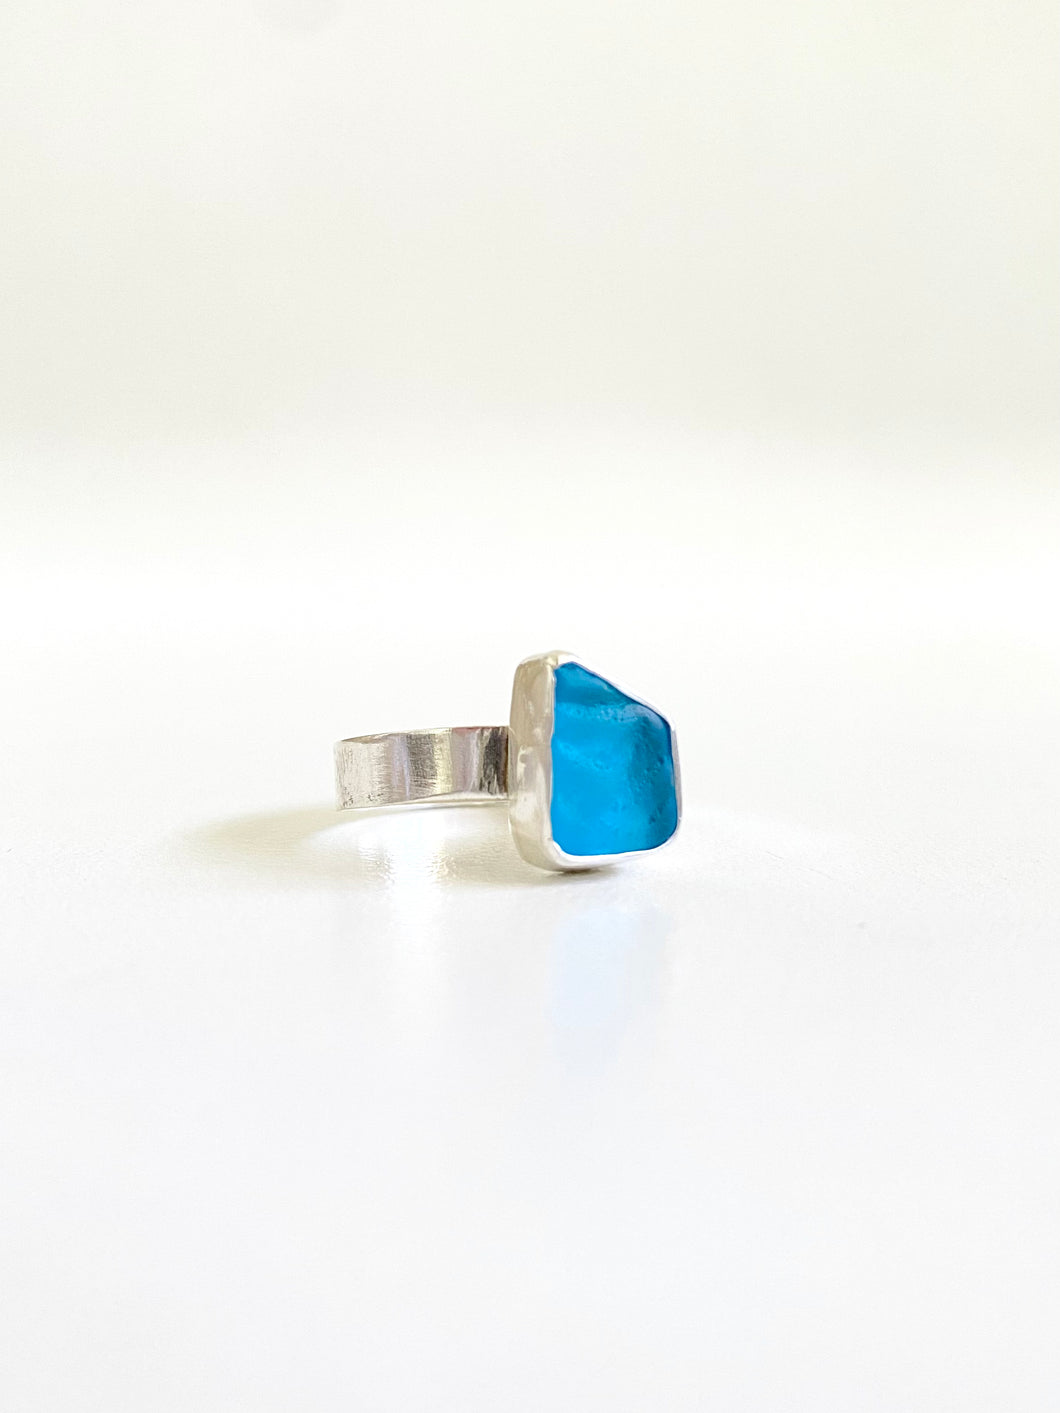 Patterned Turquoise Sea glass ring